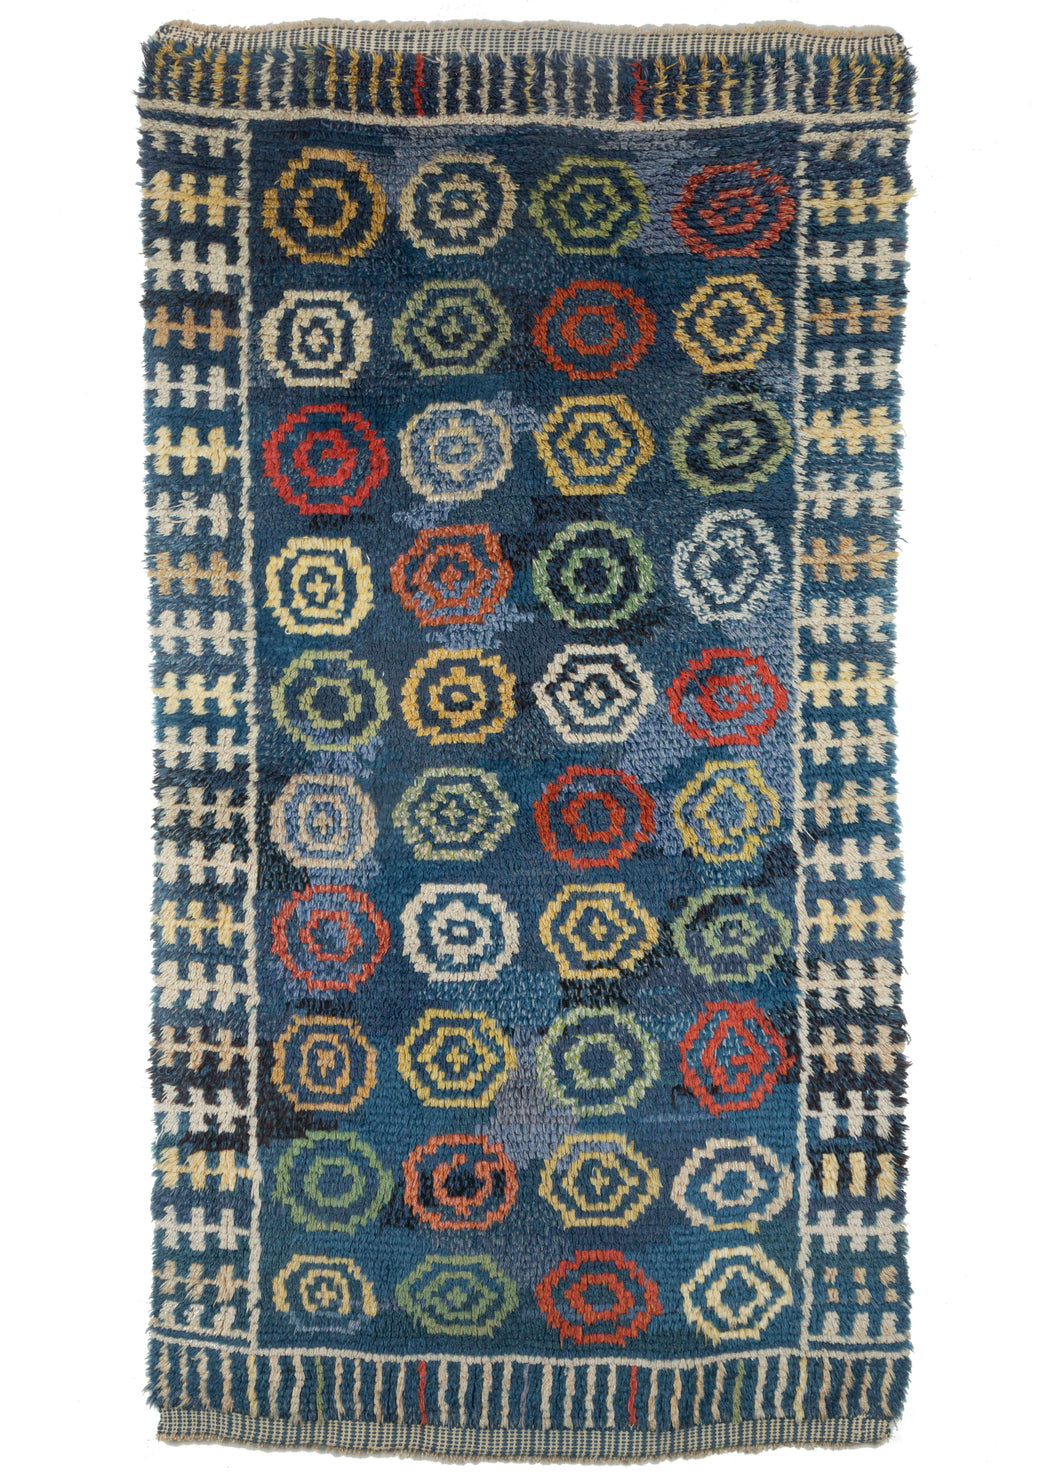 Mid Century handwoven rya rug blanket small runner size blue with rainnbow circles in yellow red green and orannge